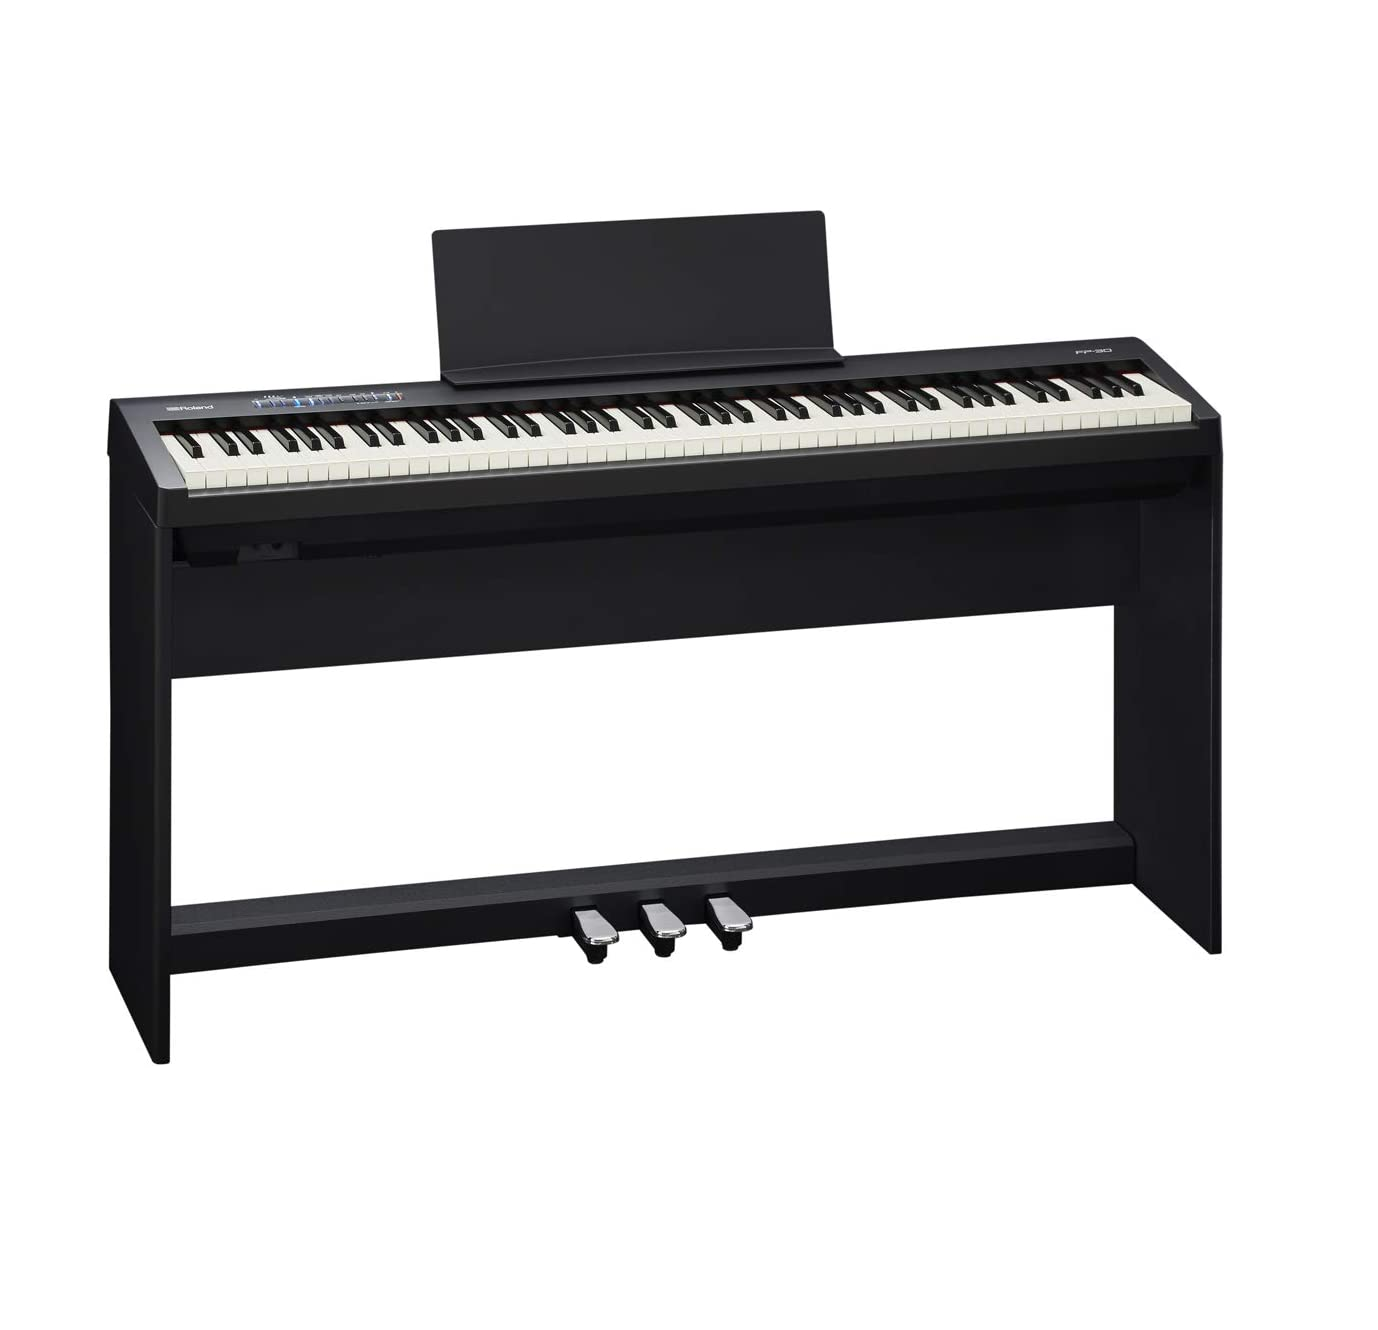 https://www.keyboardpiano.co.uk/wp-content/uploads/2021/03/Roland-FP-30-with-stand-2.png